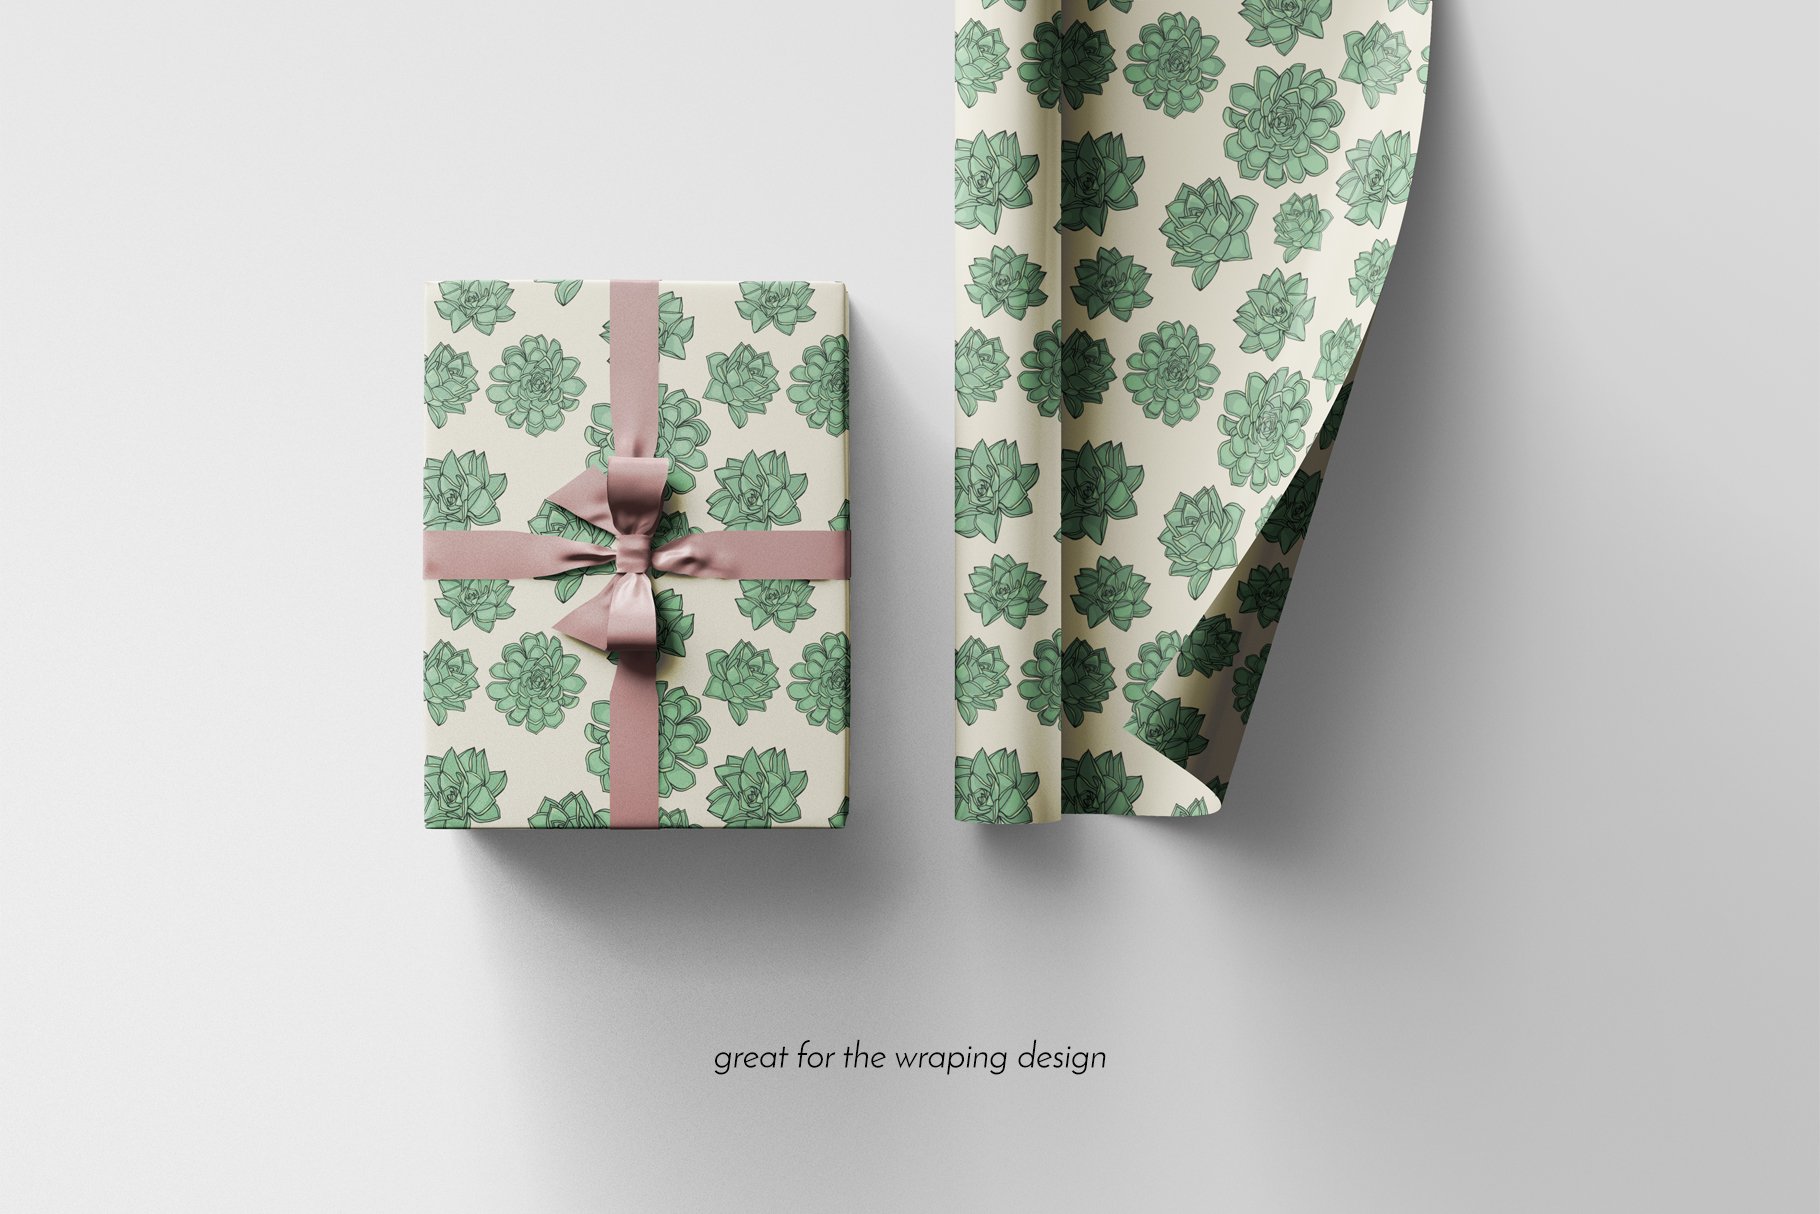 Festive green flowers on the wrapping paper.